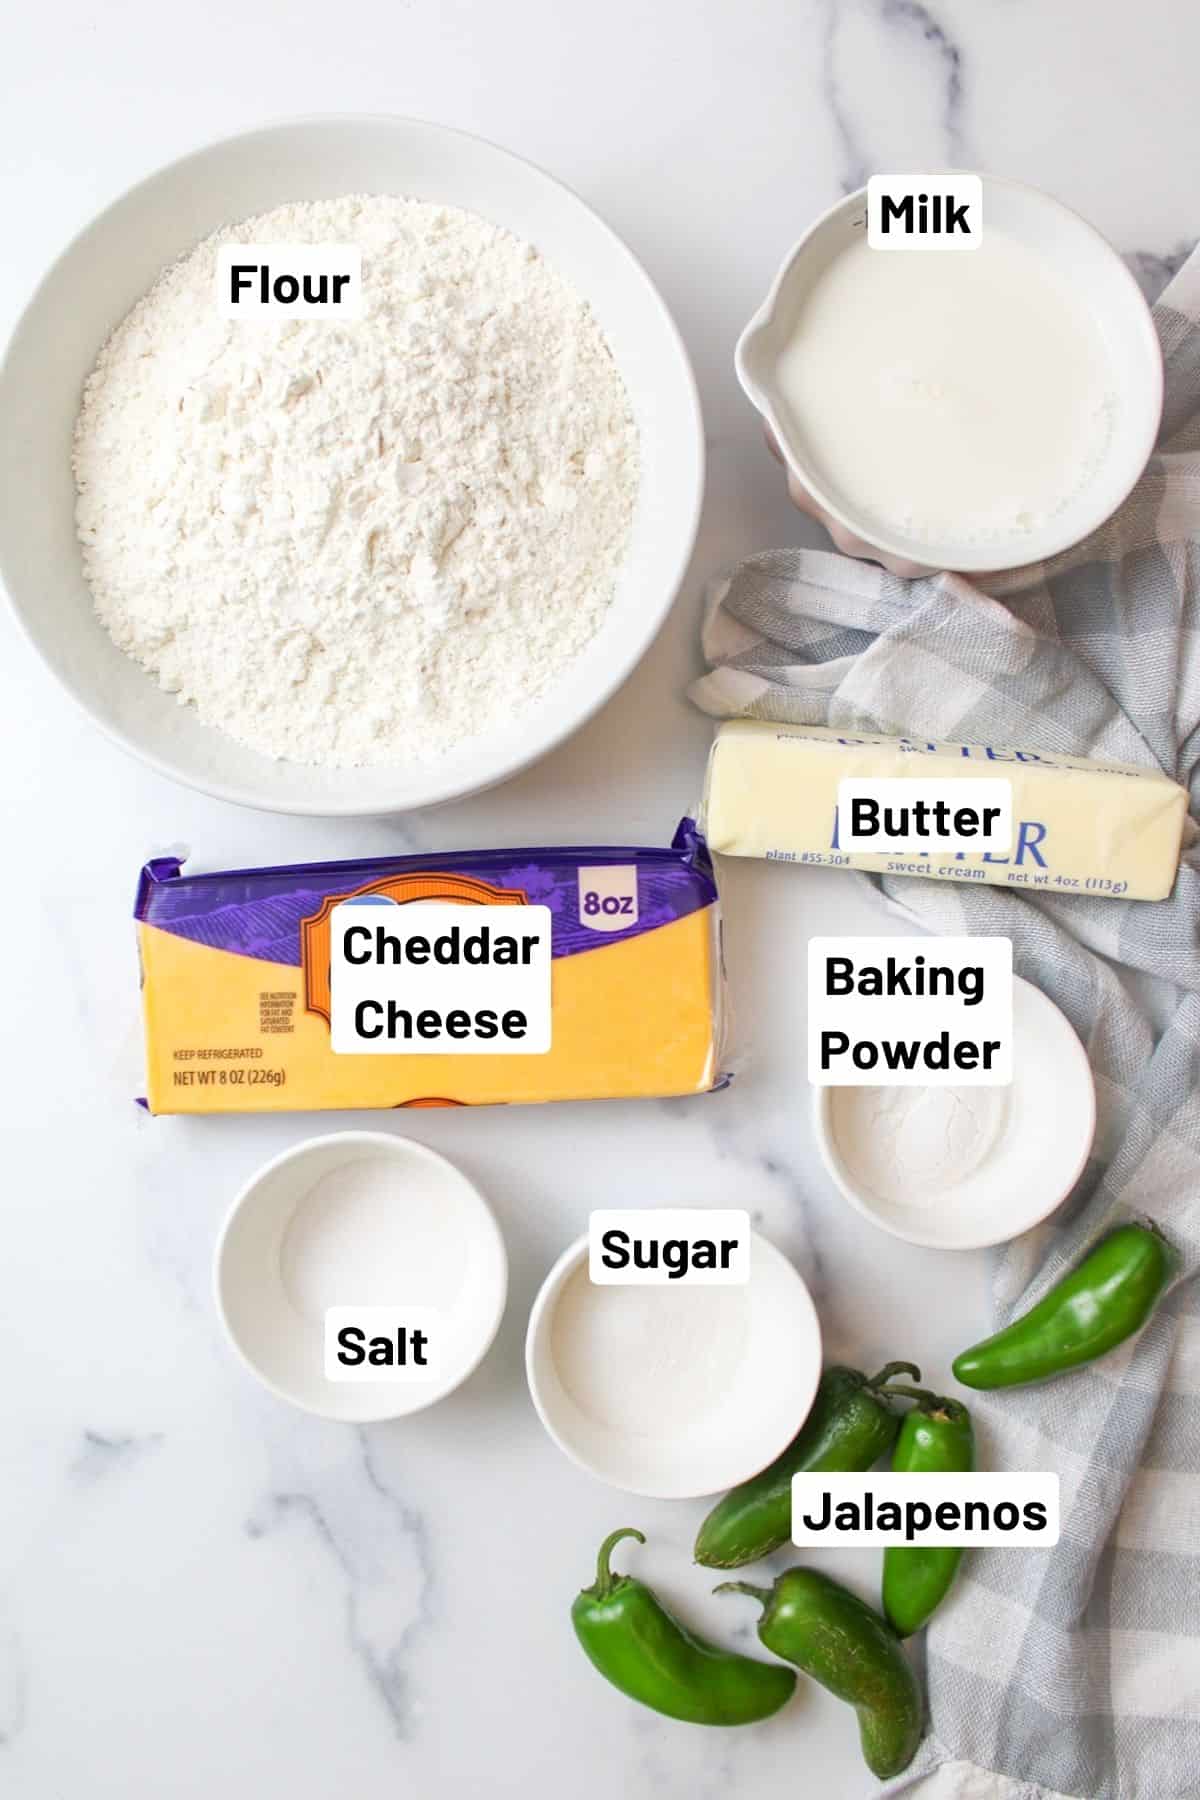 labeled ingredients needed to make jalapeno cheddar biscuits.